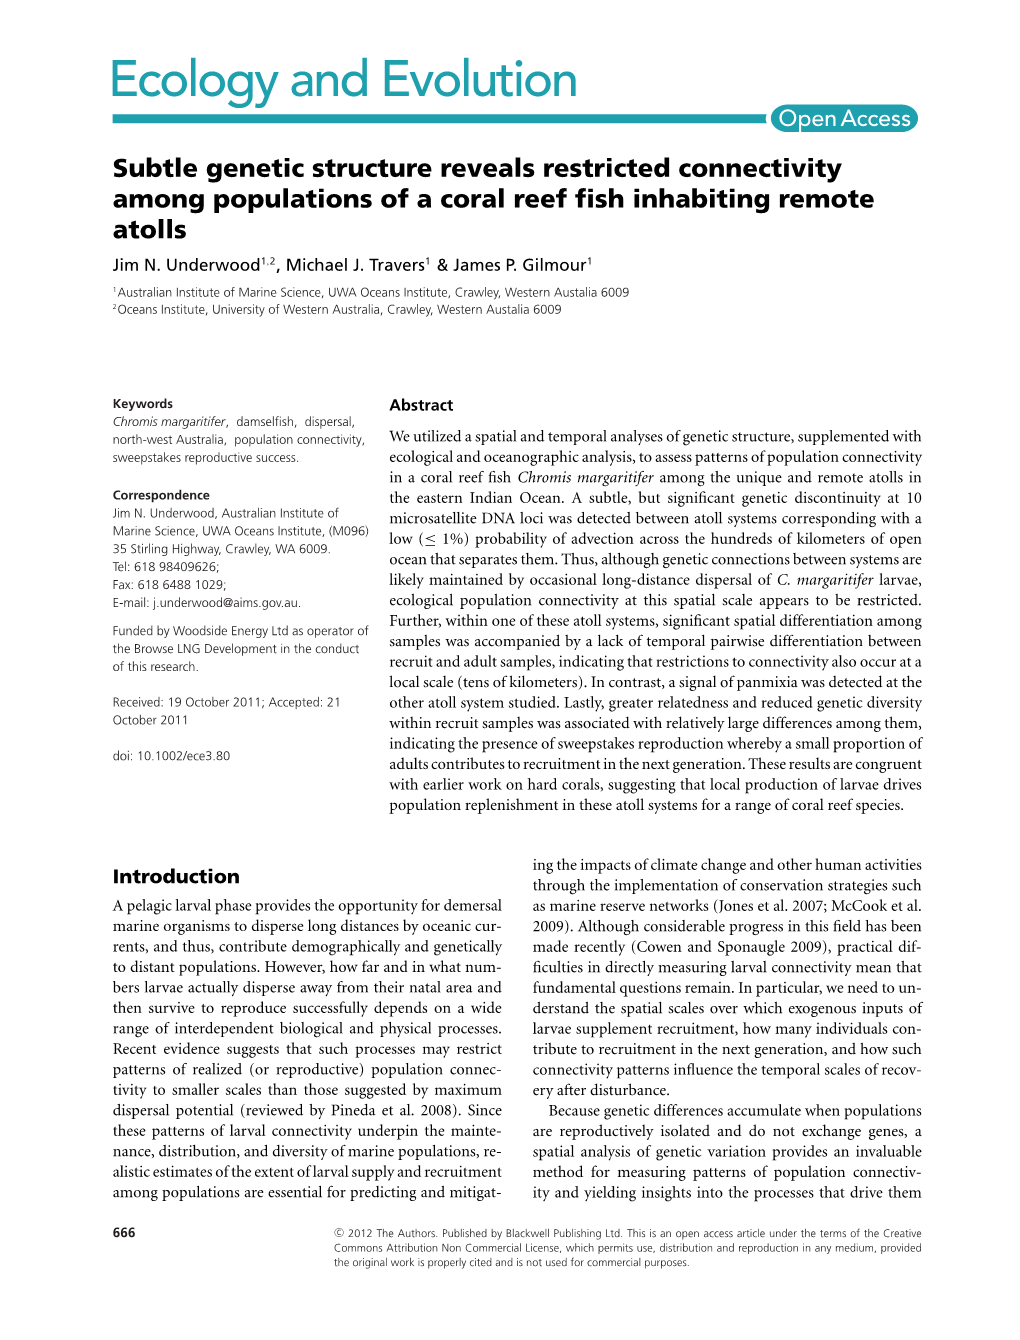 Subtle Genetic Structure Reveals Restricted Connectivity Among Populations of a Coral Reef ﬁsh Inhabiting Remote Atolls Jim N